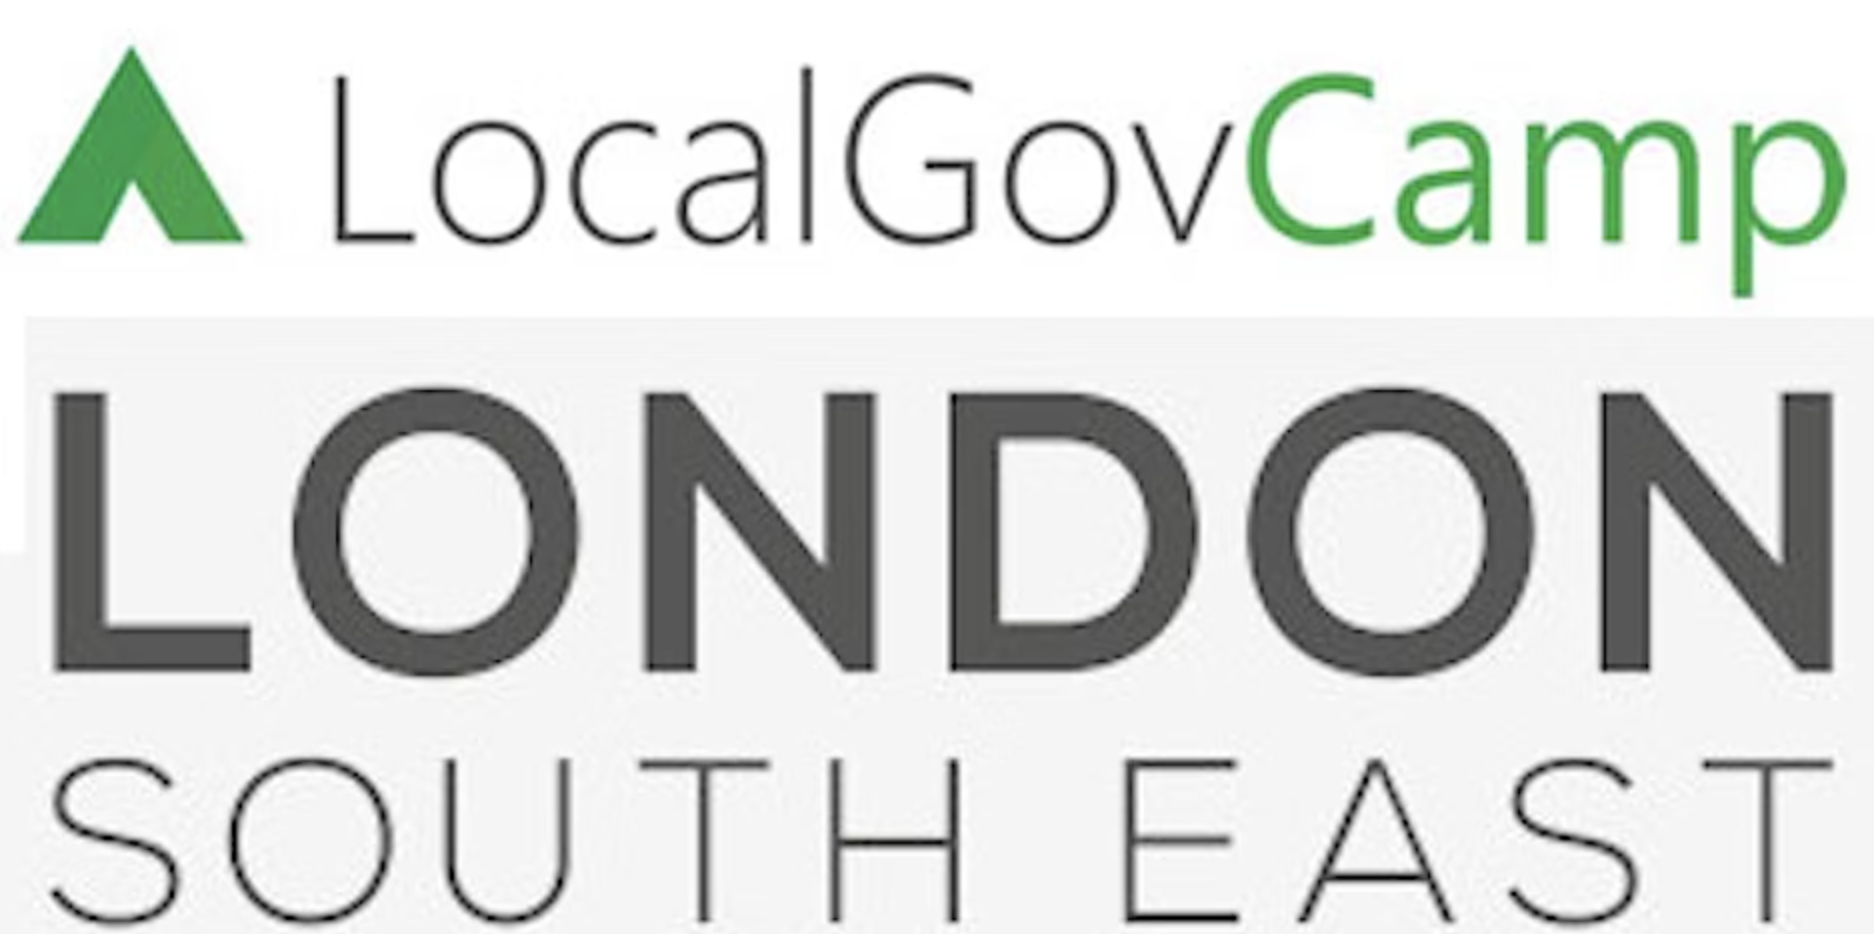 LocalGovCamp: London South East